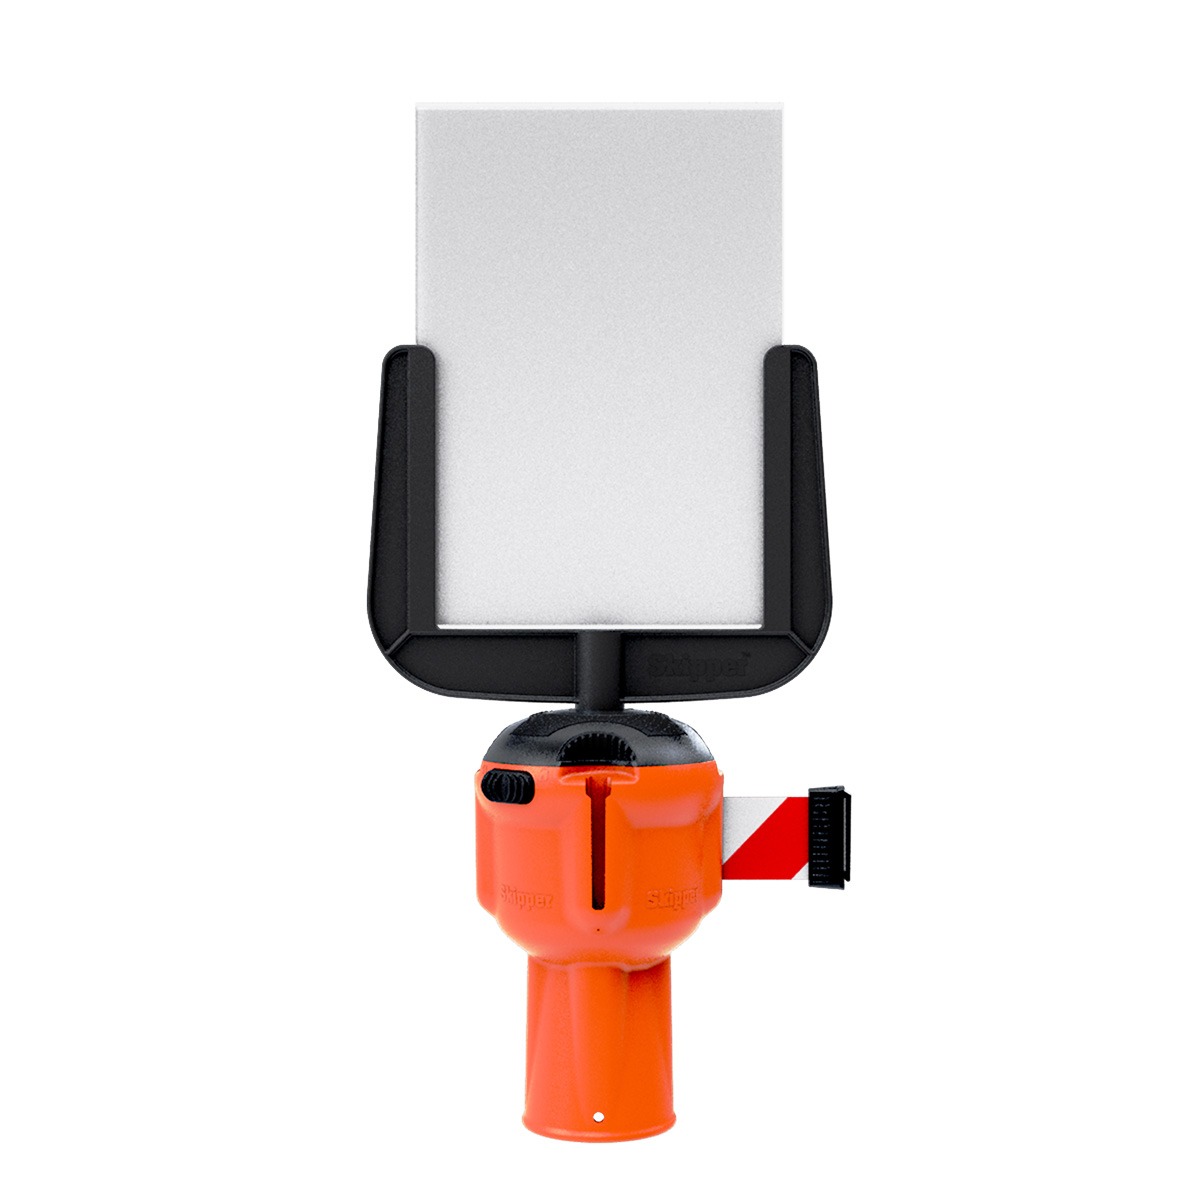 Skipper A4 Sign Holder Has Weatherproof Polycarbonate Cover